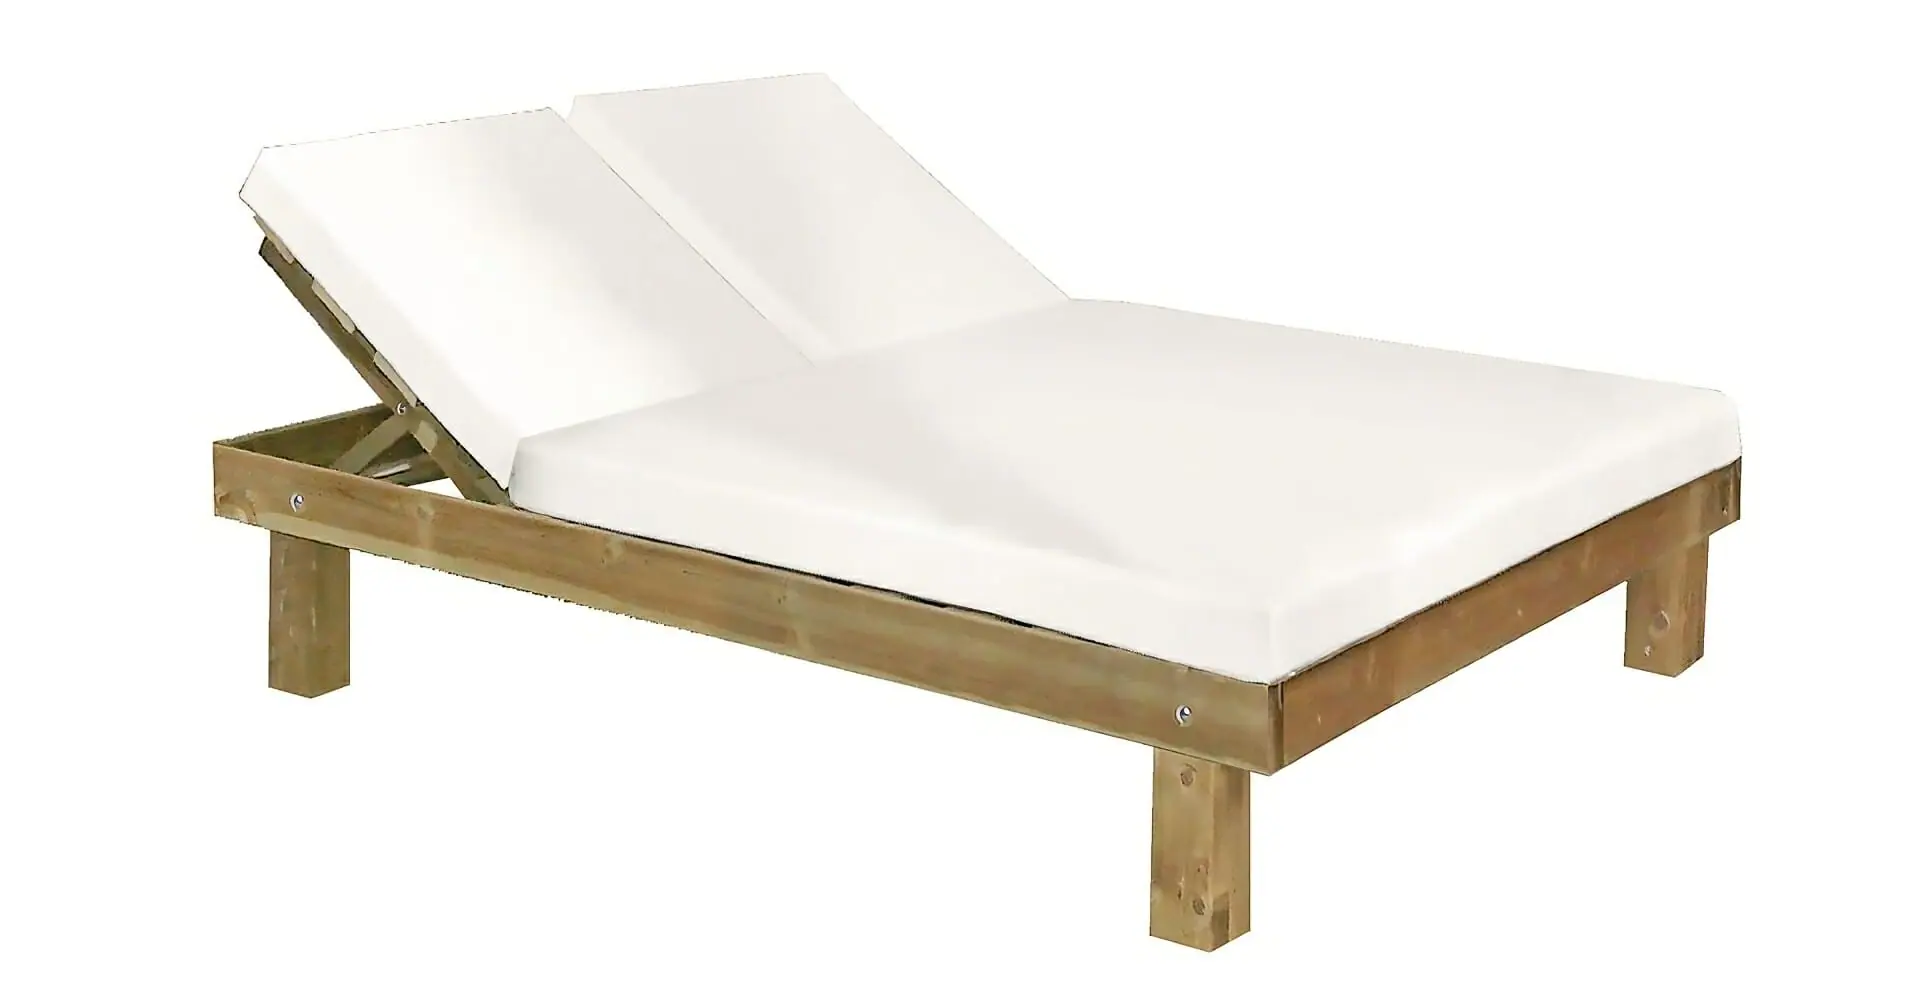 conva-madera-outdoor-double-sunbed-wooden-collection-1